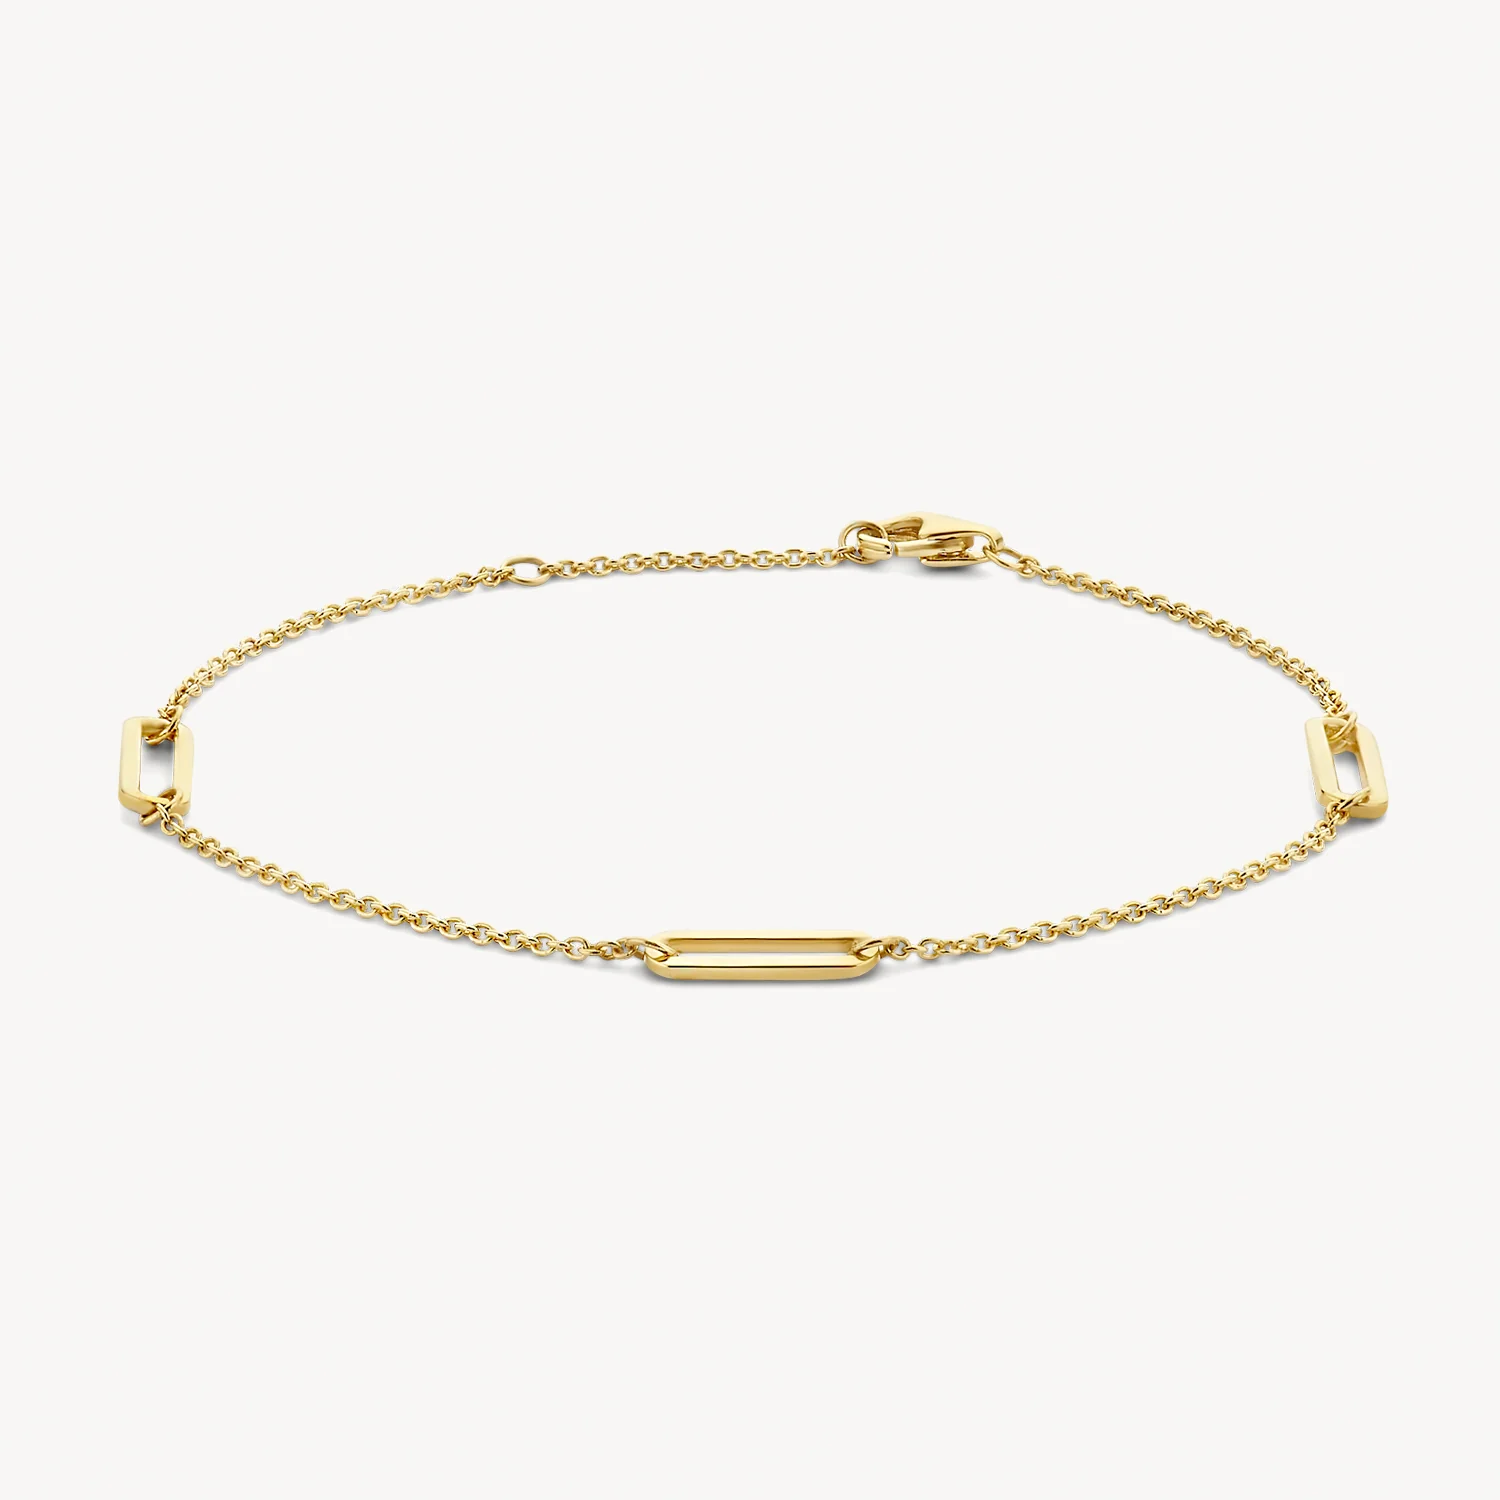 Blush Yellow Gold Chain Bracelet with Oval Links